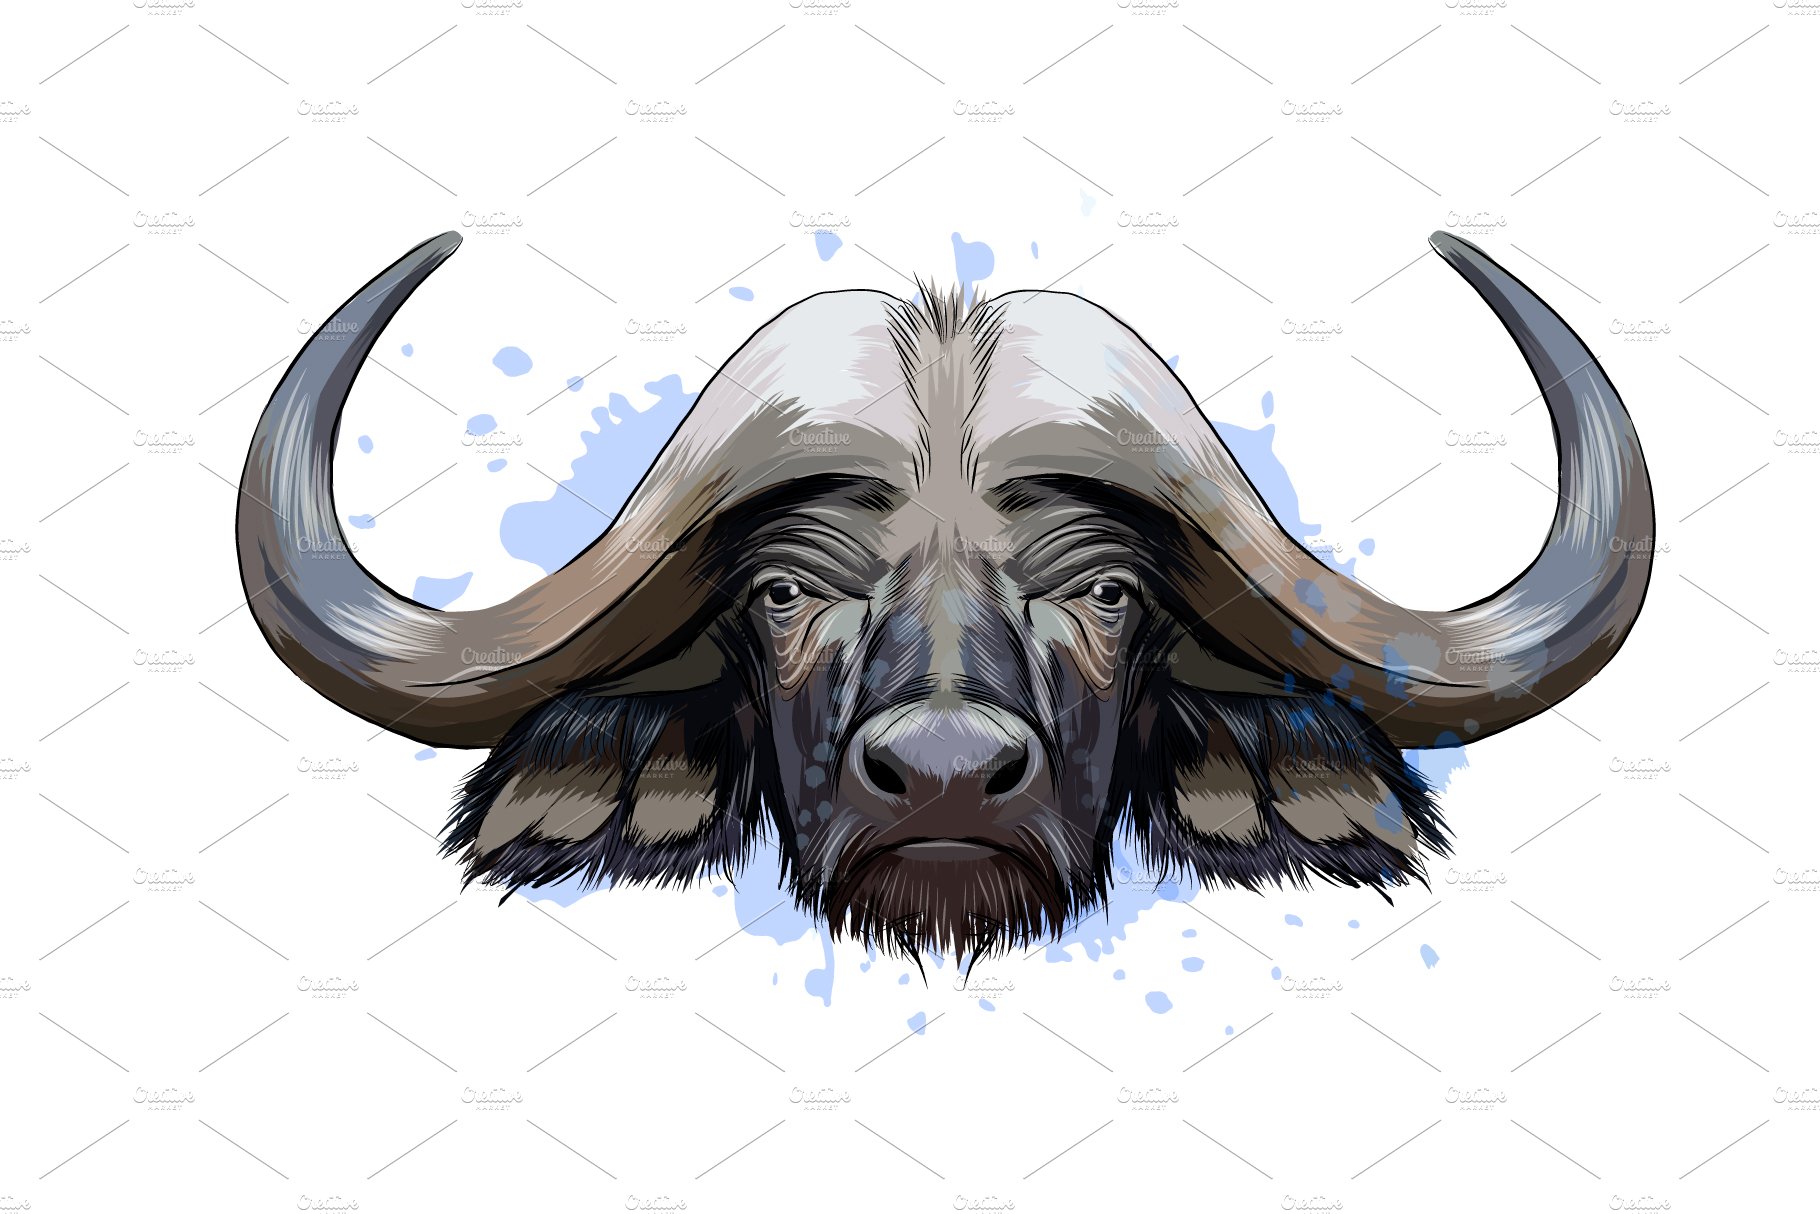 Buffalo, bison,ox, bull Hipster animal Hand drawn image for tattoo, emblem,  badge, logo, patch, t-shirt Stock Illustration by ©Helen_F #150140866